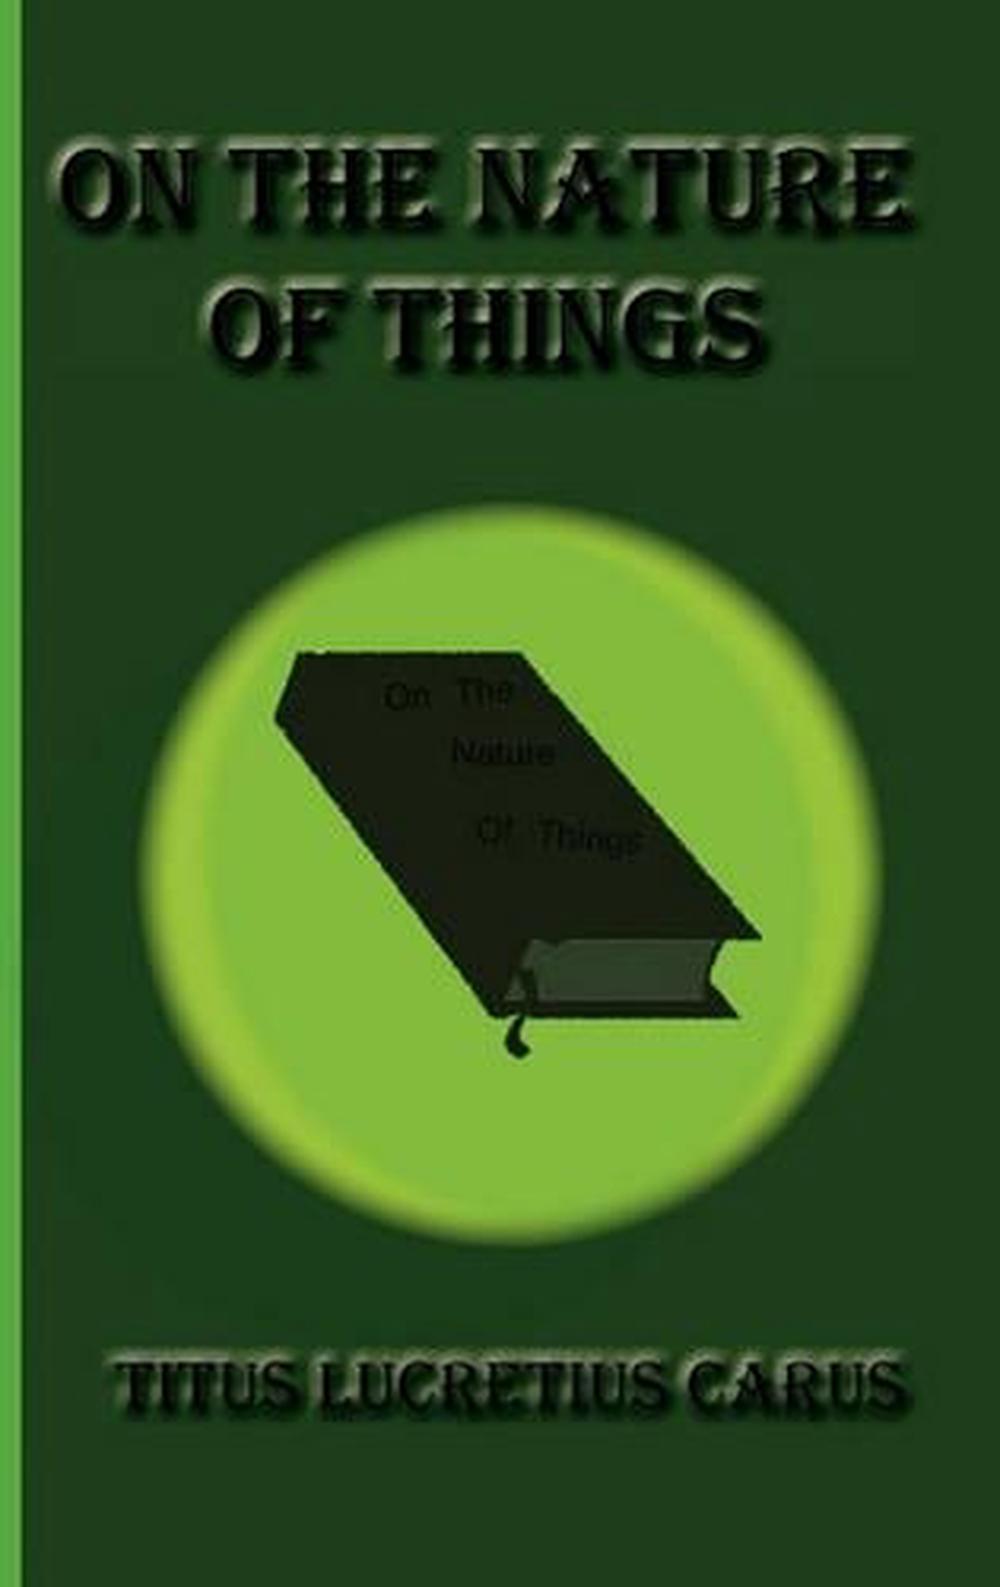 the nature of things book